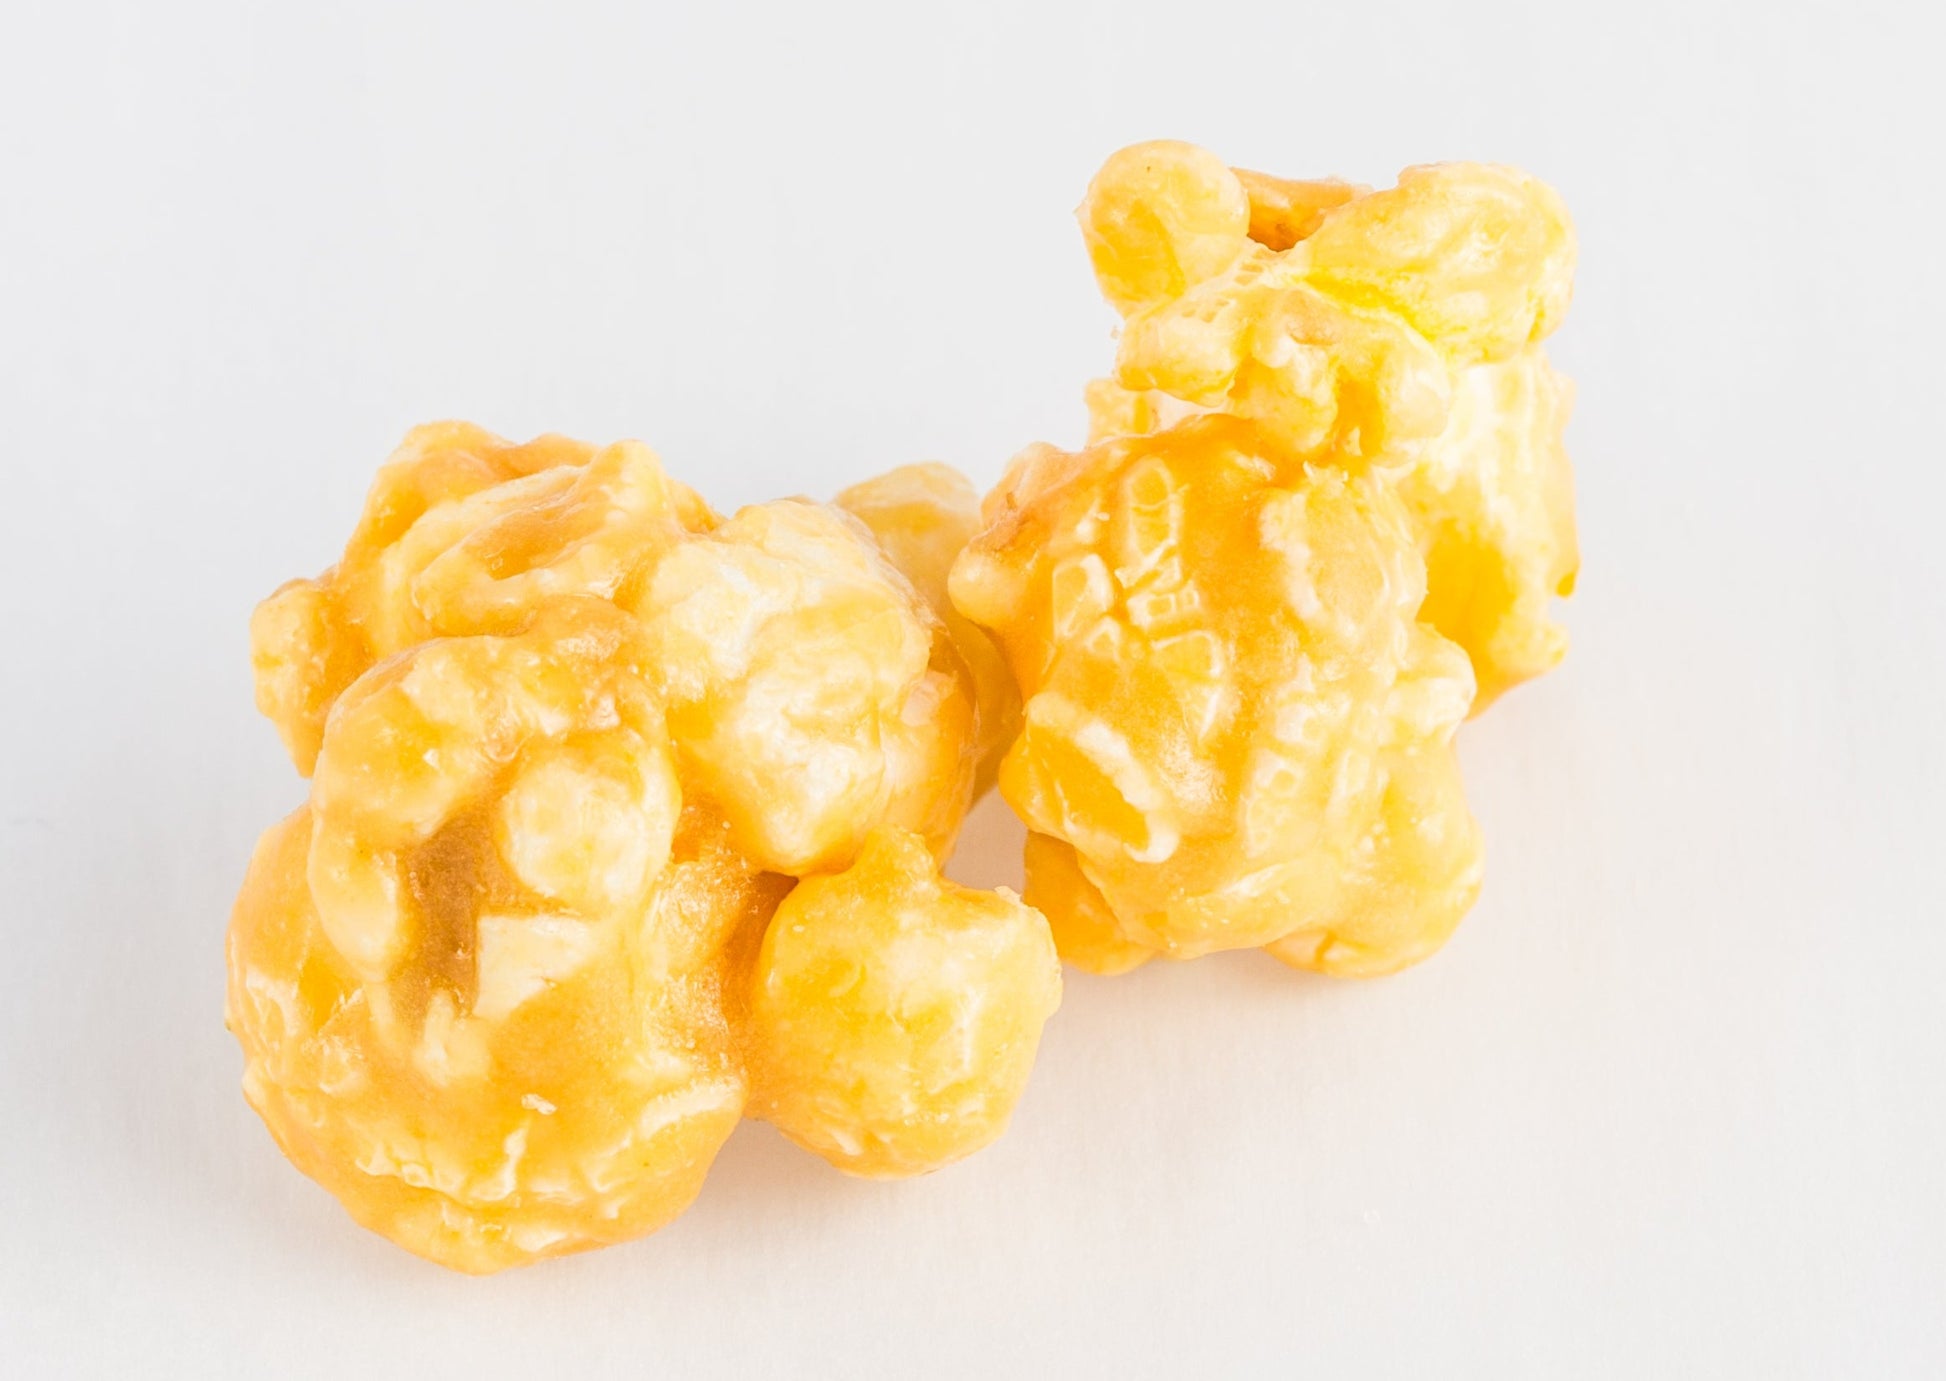 Two kernels of popped popcorn covered in caramel.